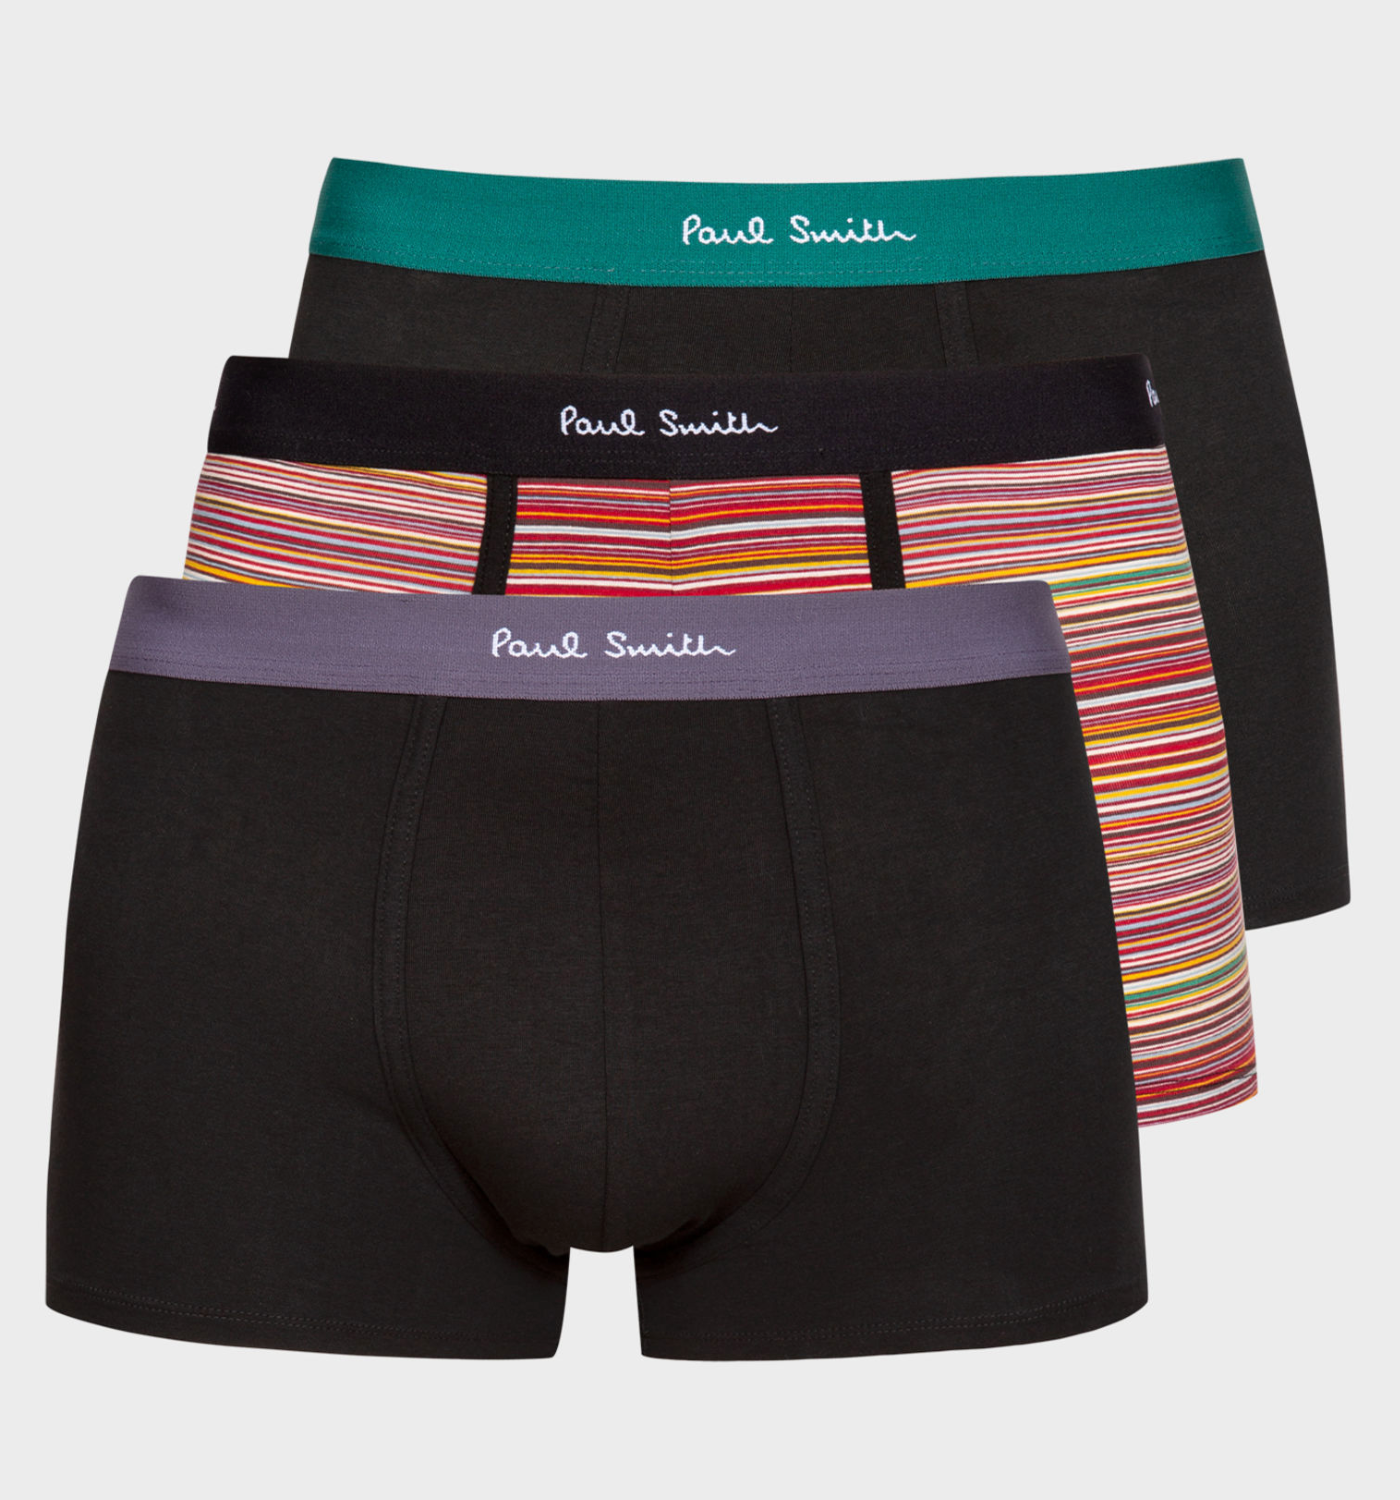 PS Paul Smith Underwear 3 Pack